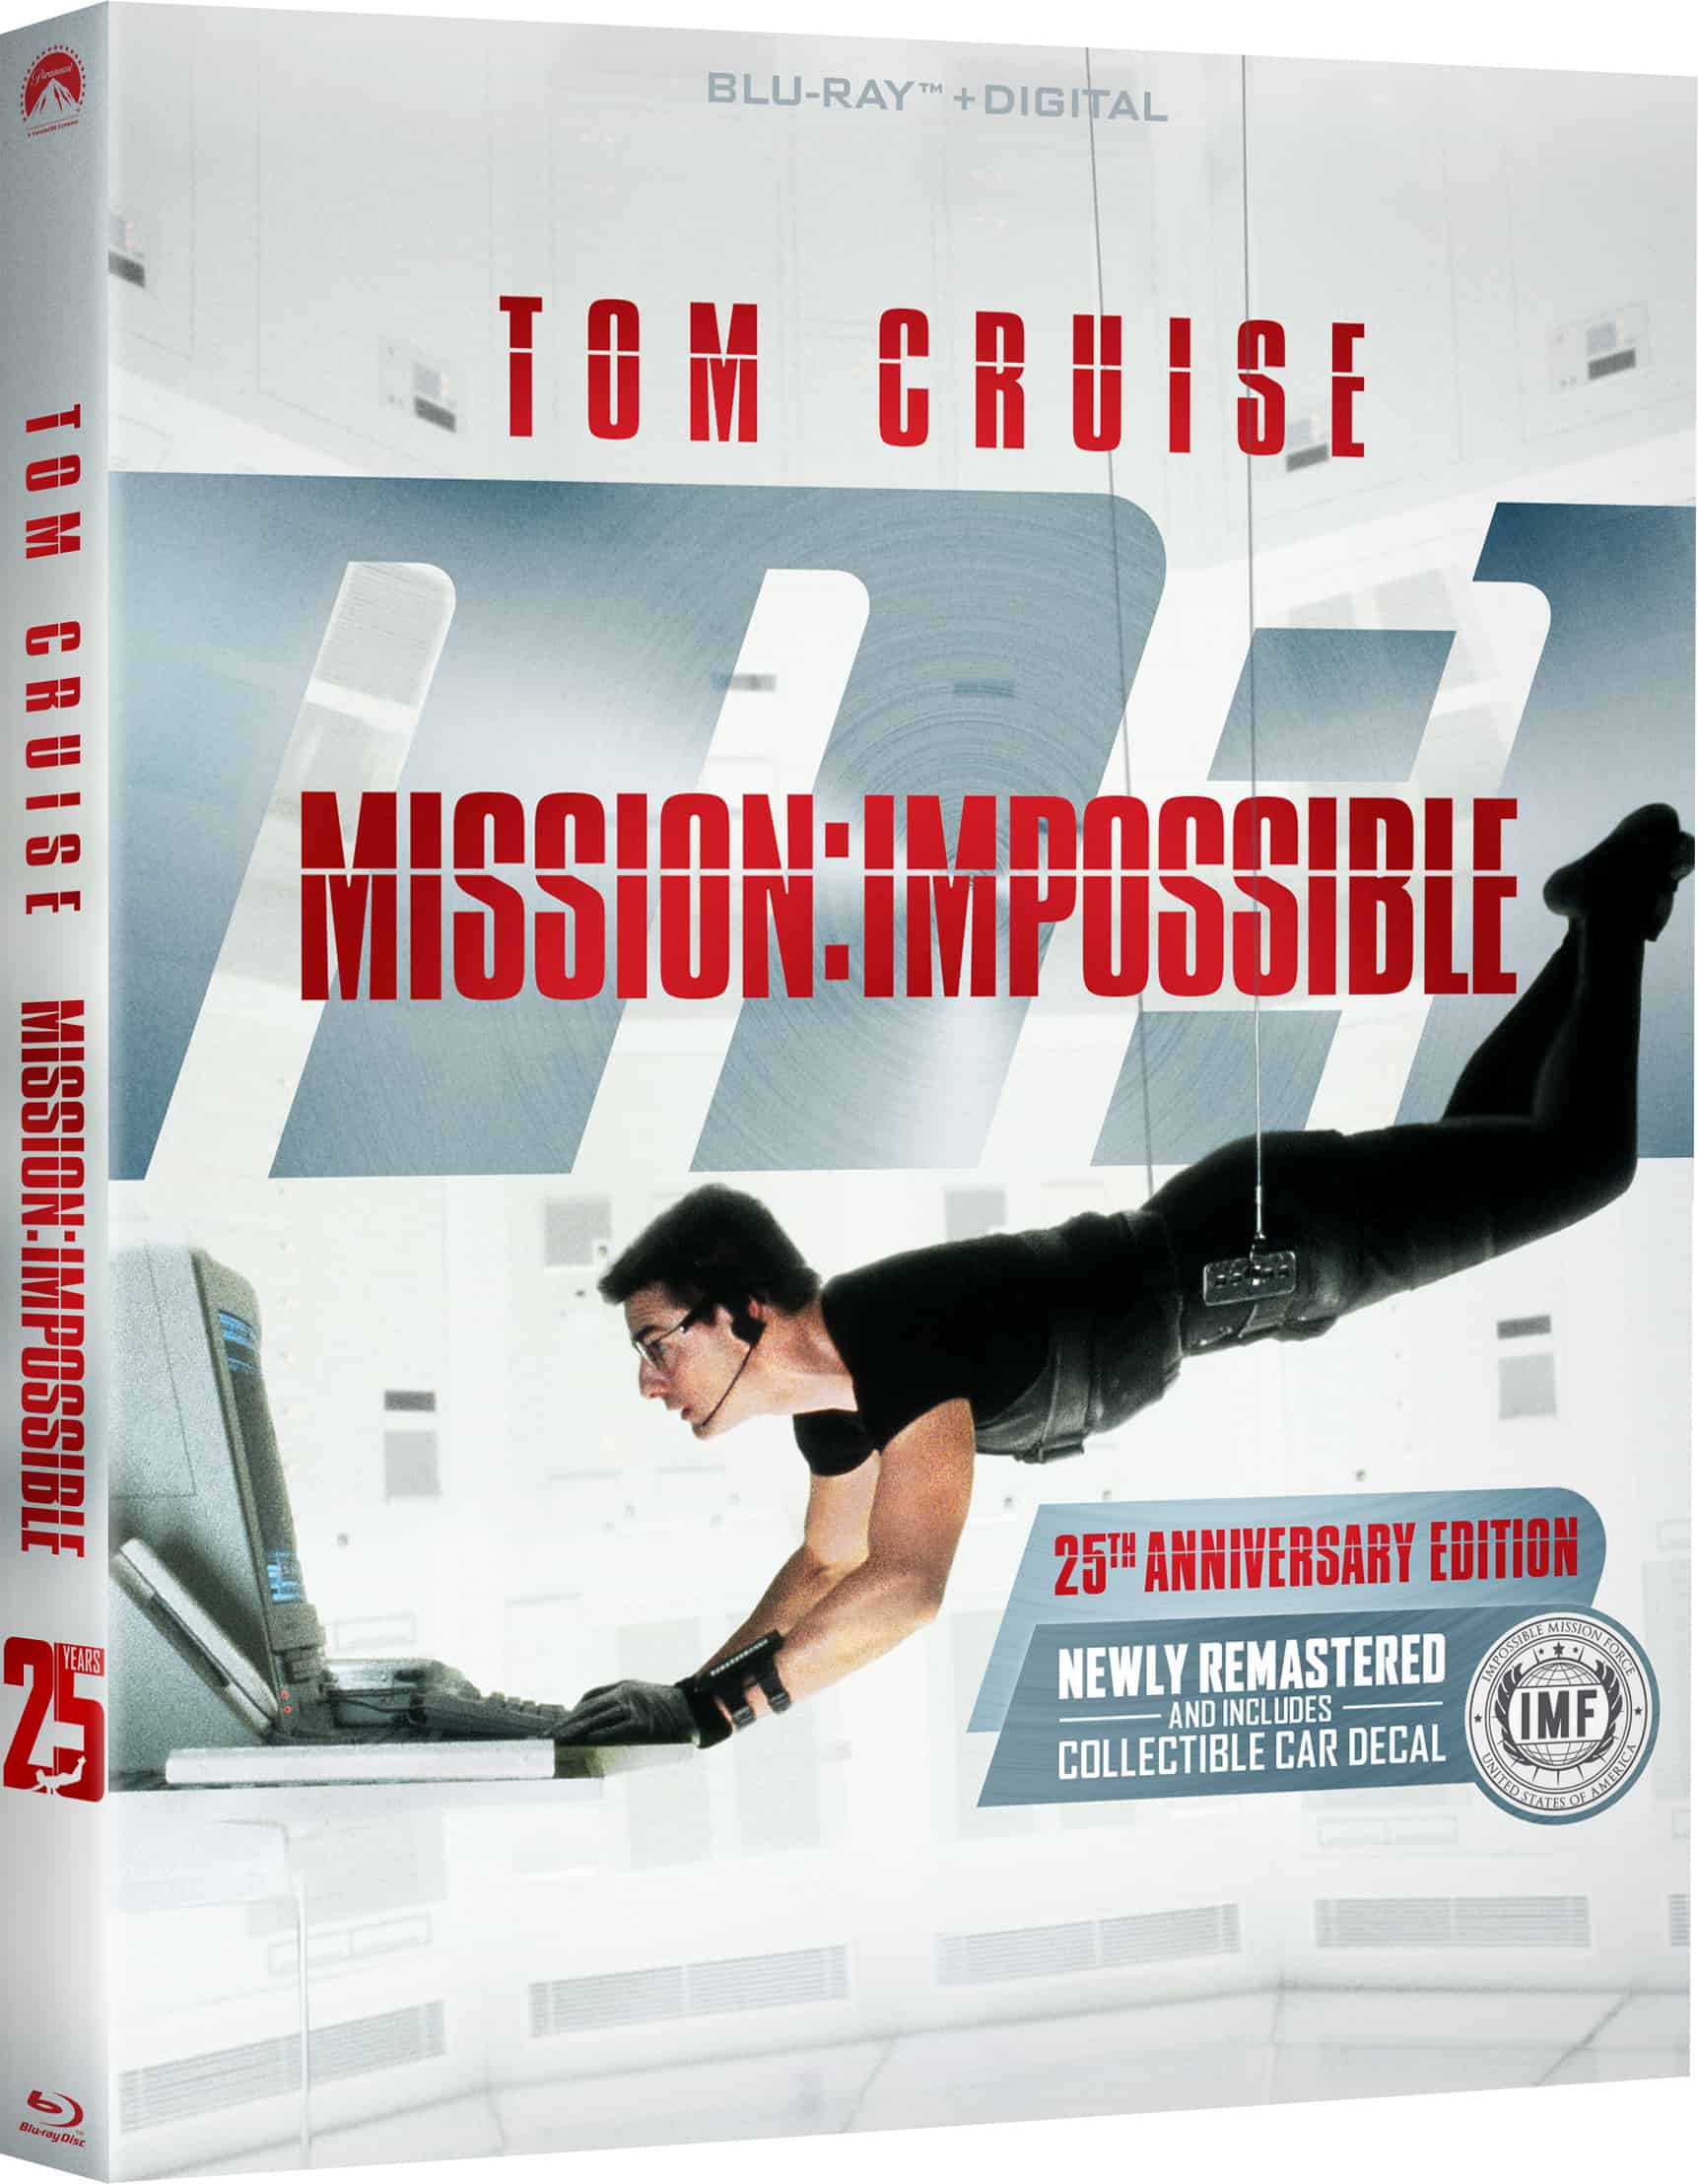 Mission Impossible Newly Remastered 25th Anniversary Collectors Edition Blu Ray Arrives On